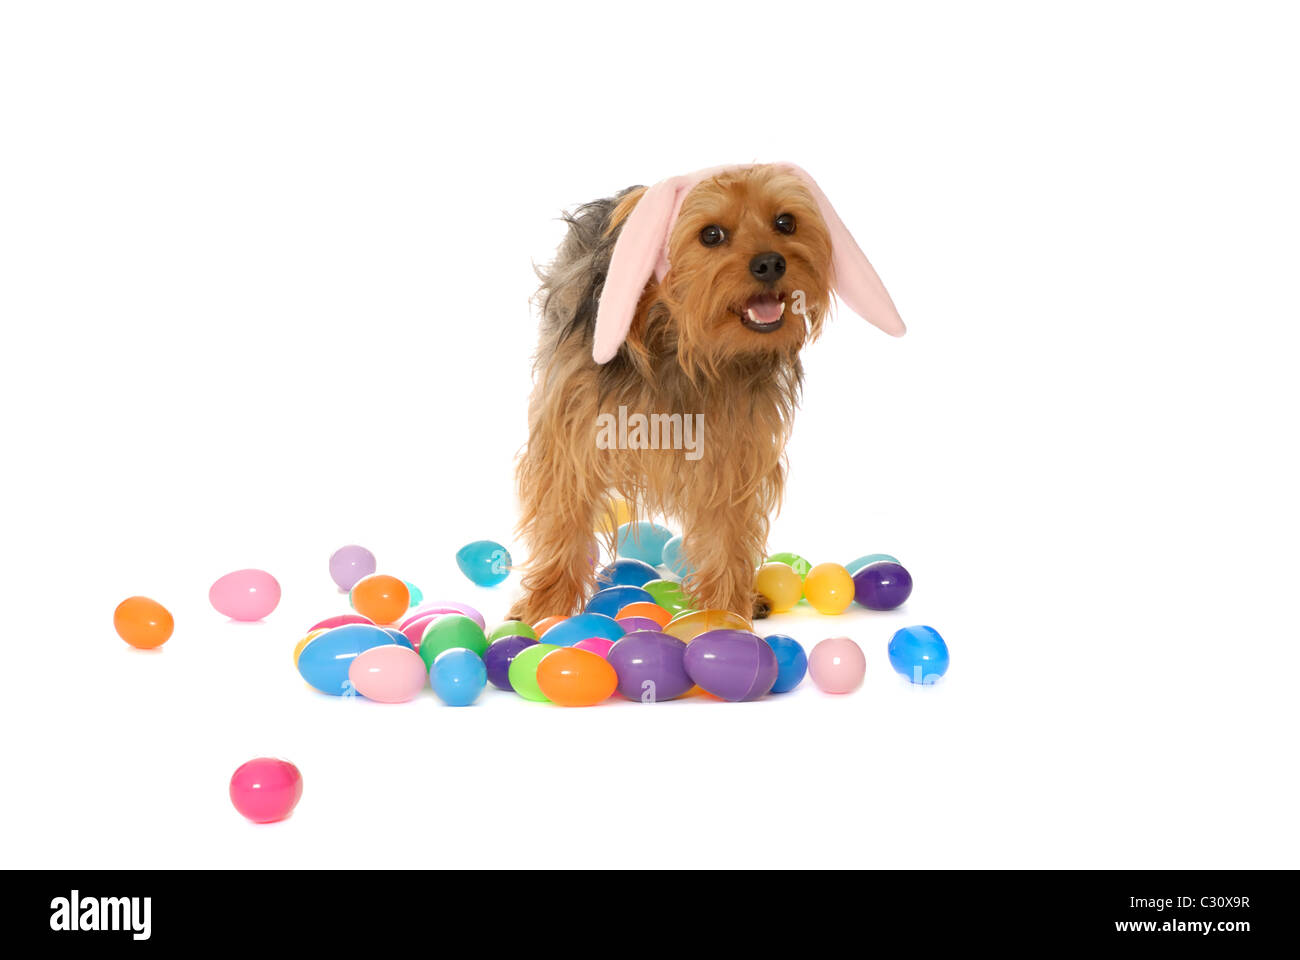 Yorkshire Terrier Dog Wearing Bunny Ears, Surrounded by Easter Eggs Stock Photo